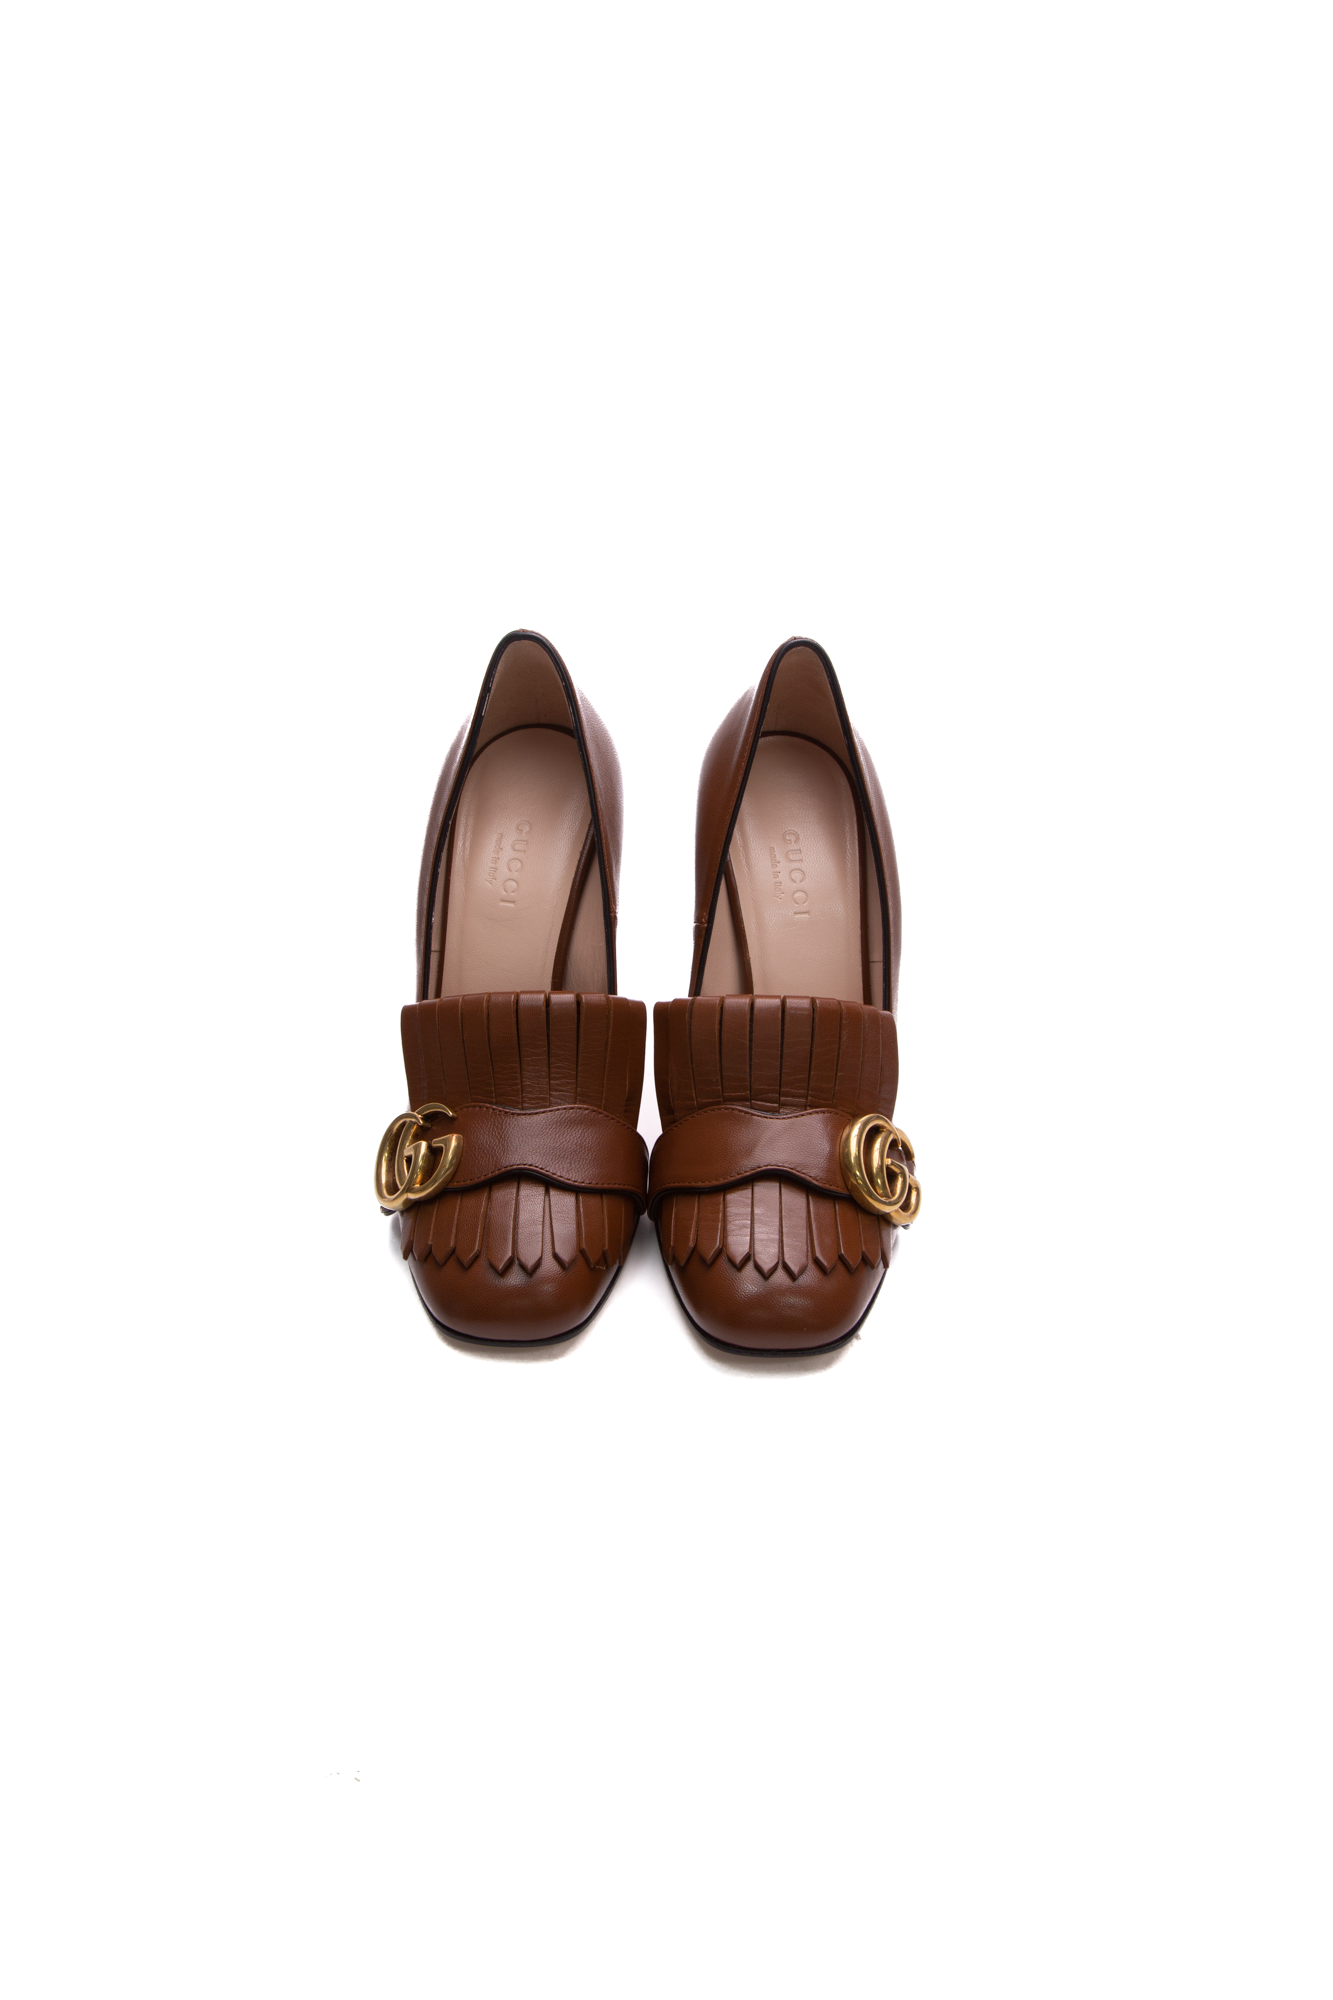 Gucci Malaga Kid Marmont Loafer Pumps - Size 35.5